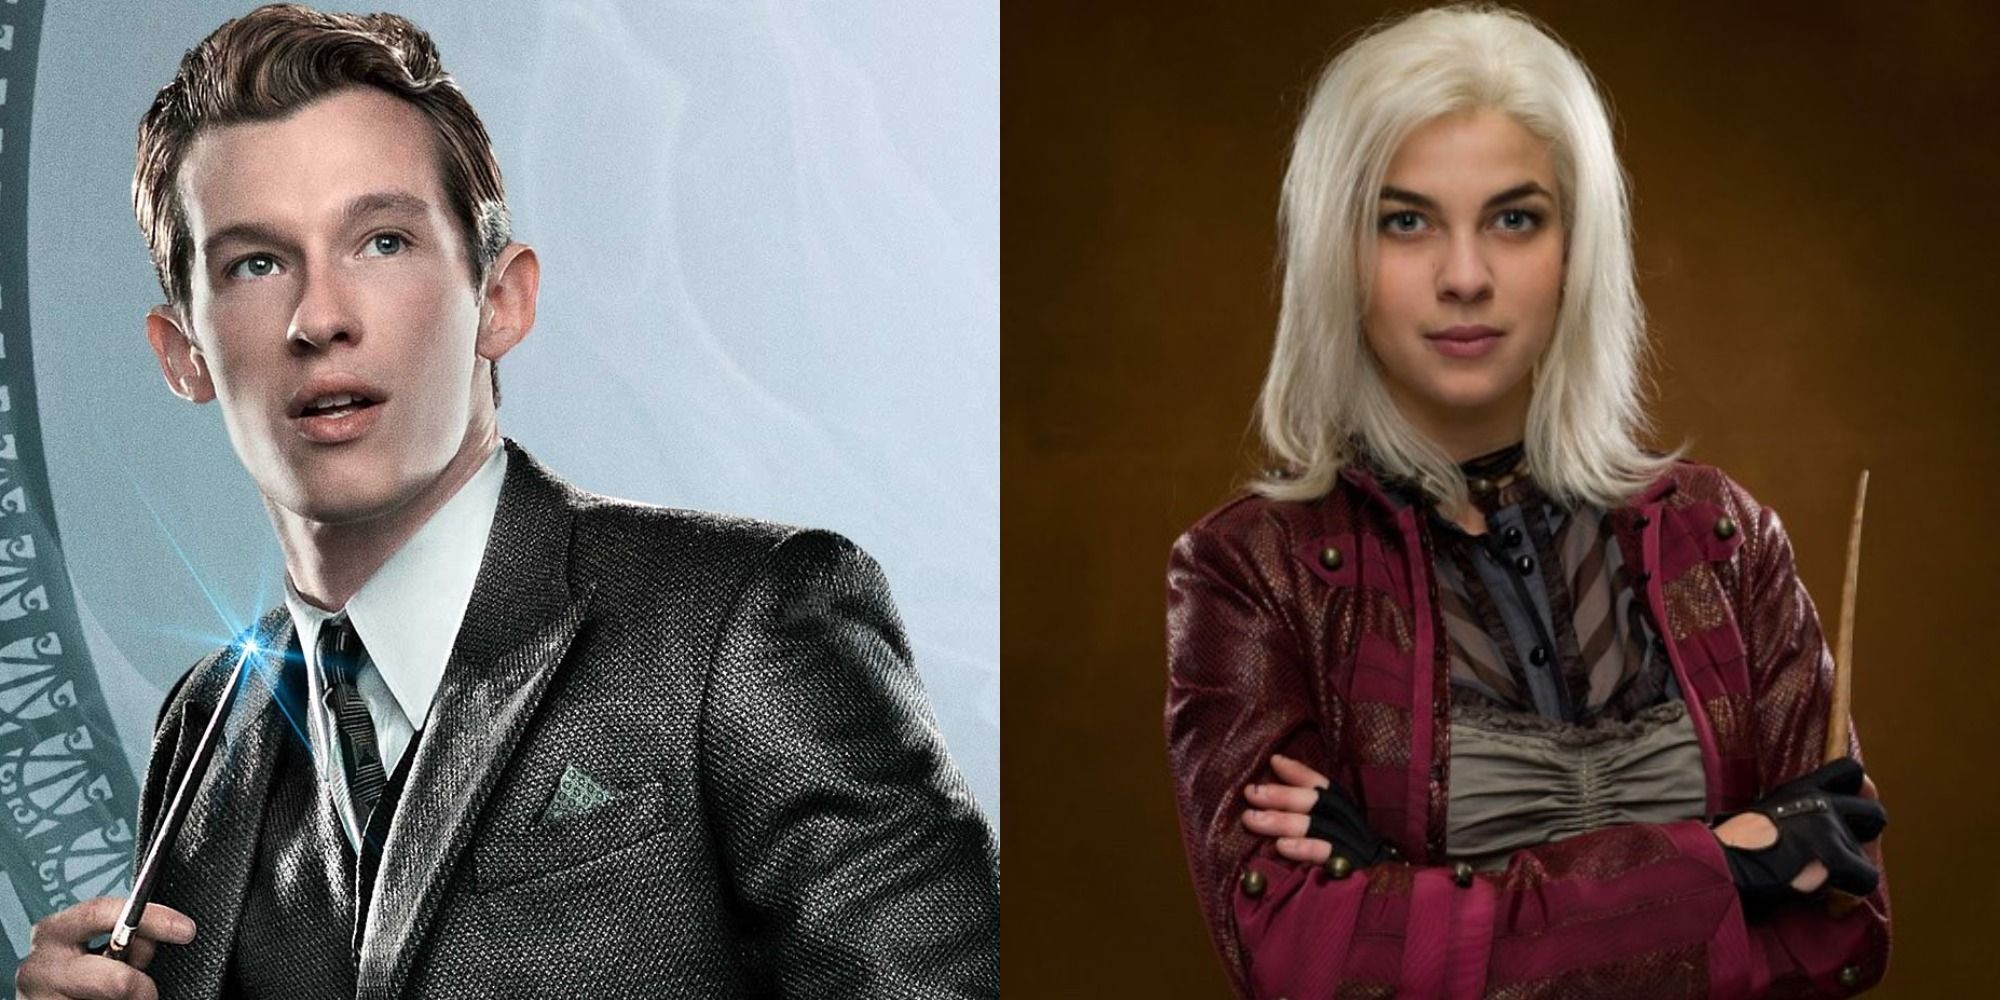 Split image showing Theseus in Fantastic Beasts and Tonks in Harry Potter